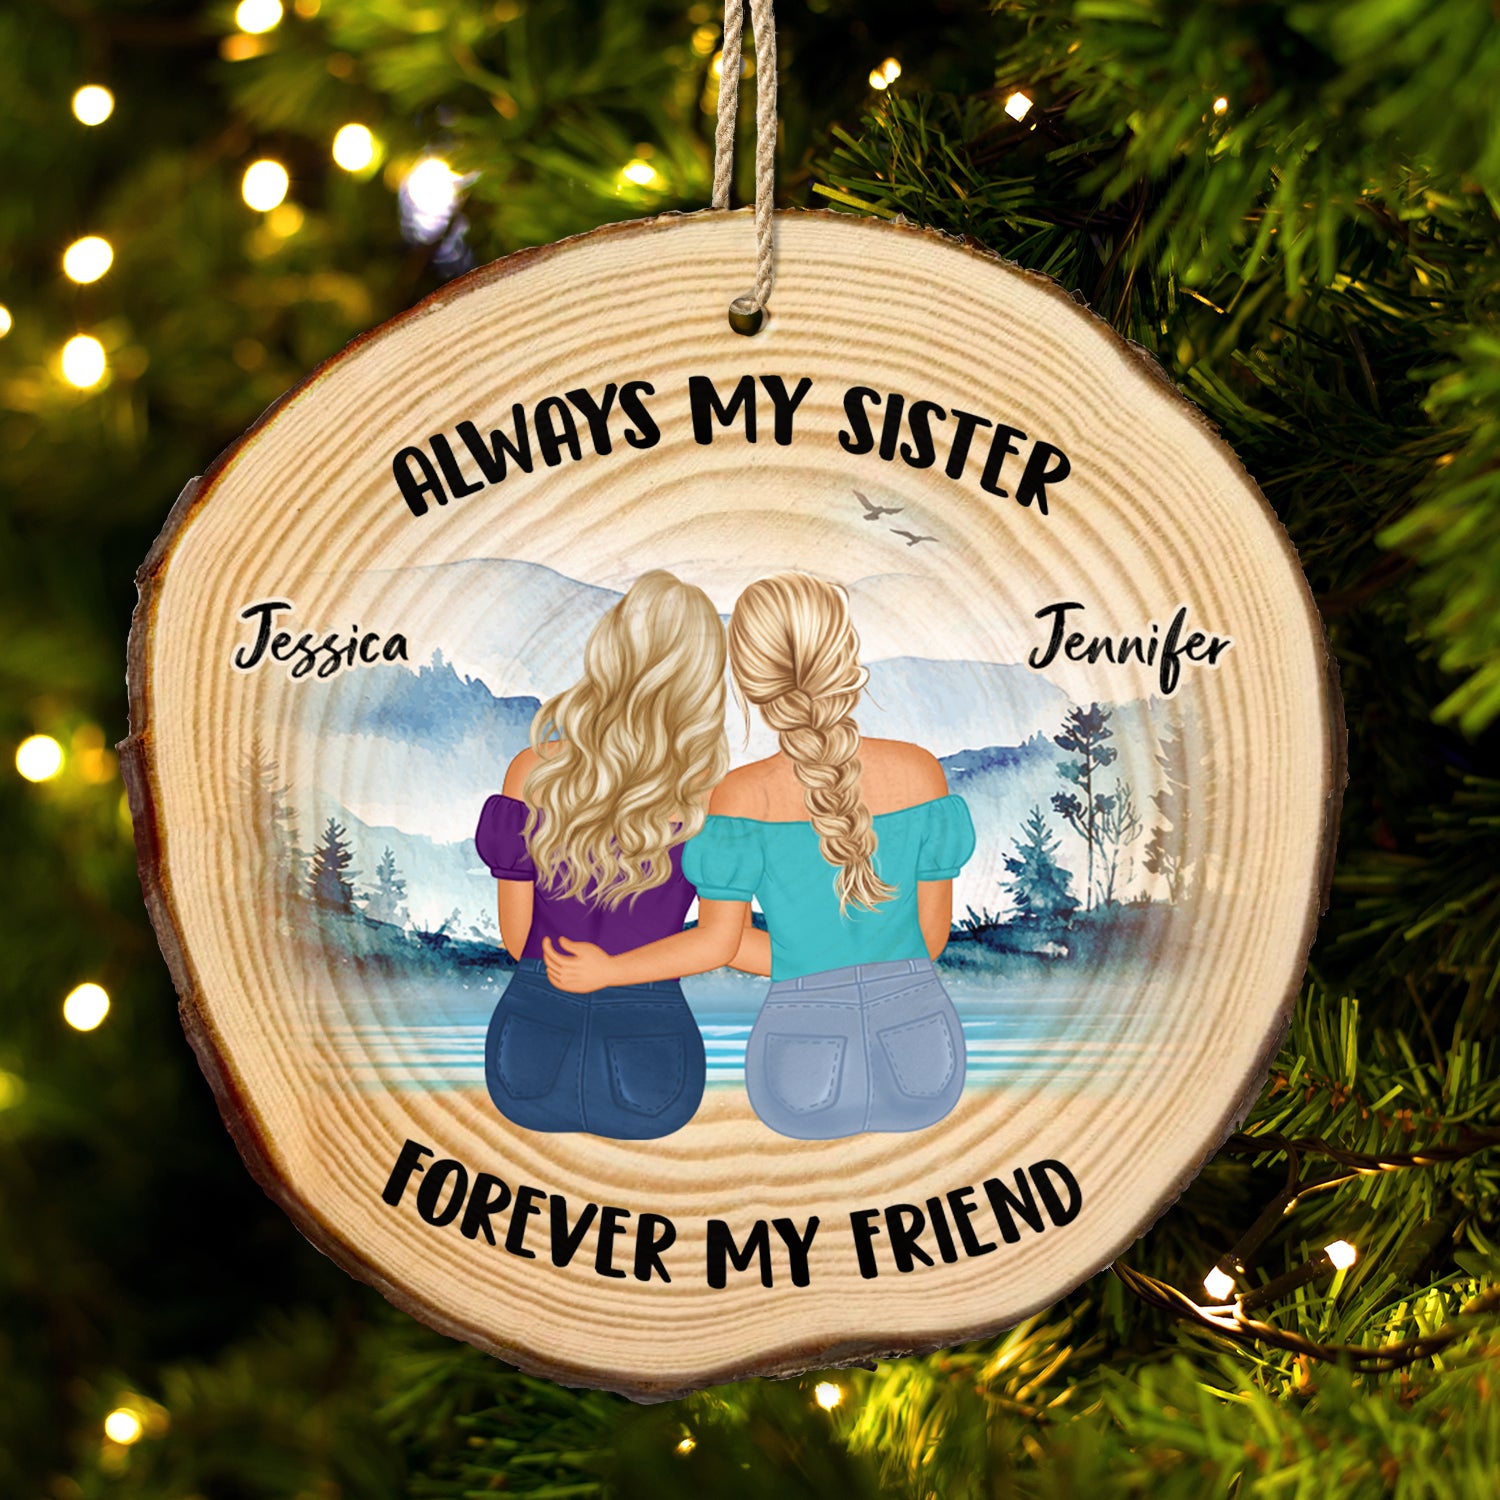 Always My Sisters - Christmas Gift For Sisters - Personalized Wood Slice Ornament